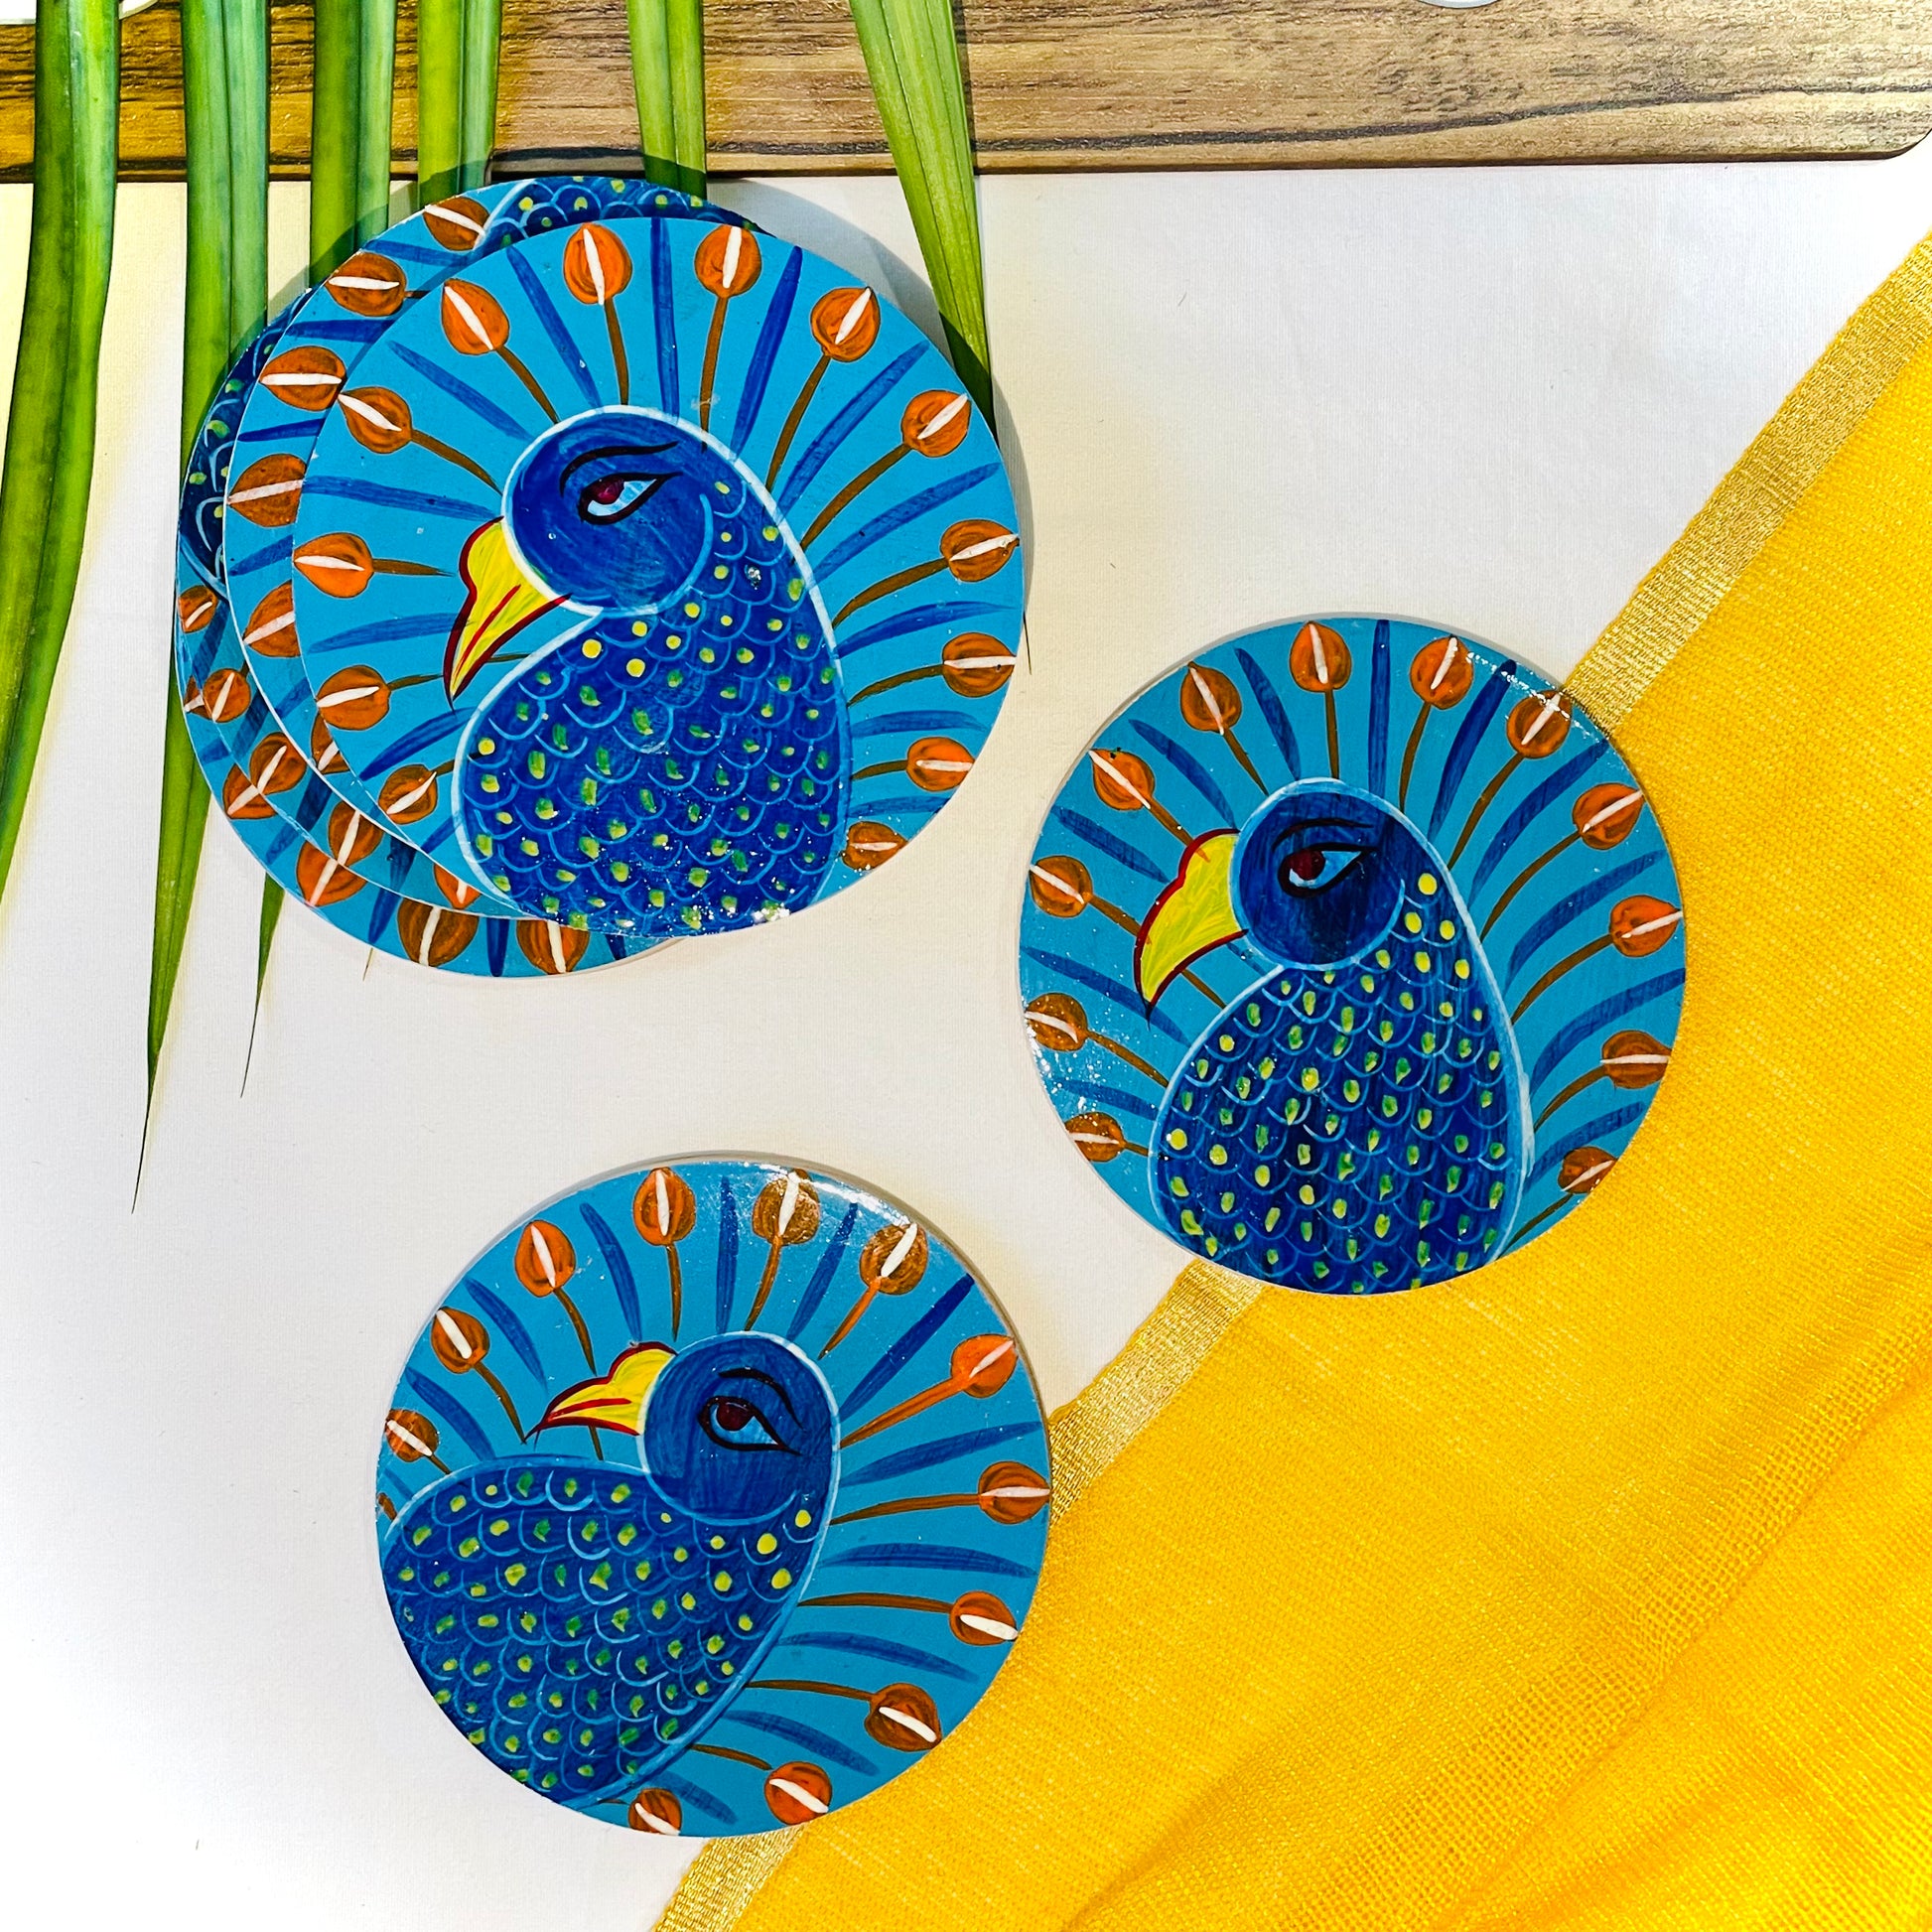 Three pure mango wood round wooden coasters, hand painted with peacocks with blue bodies, red feathers and yellow beaks are placed against a yellow backdrop and leaves in the background